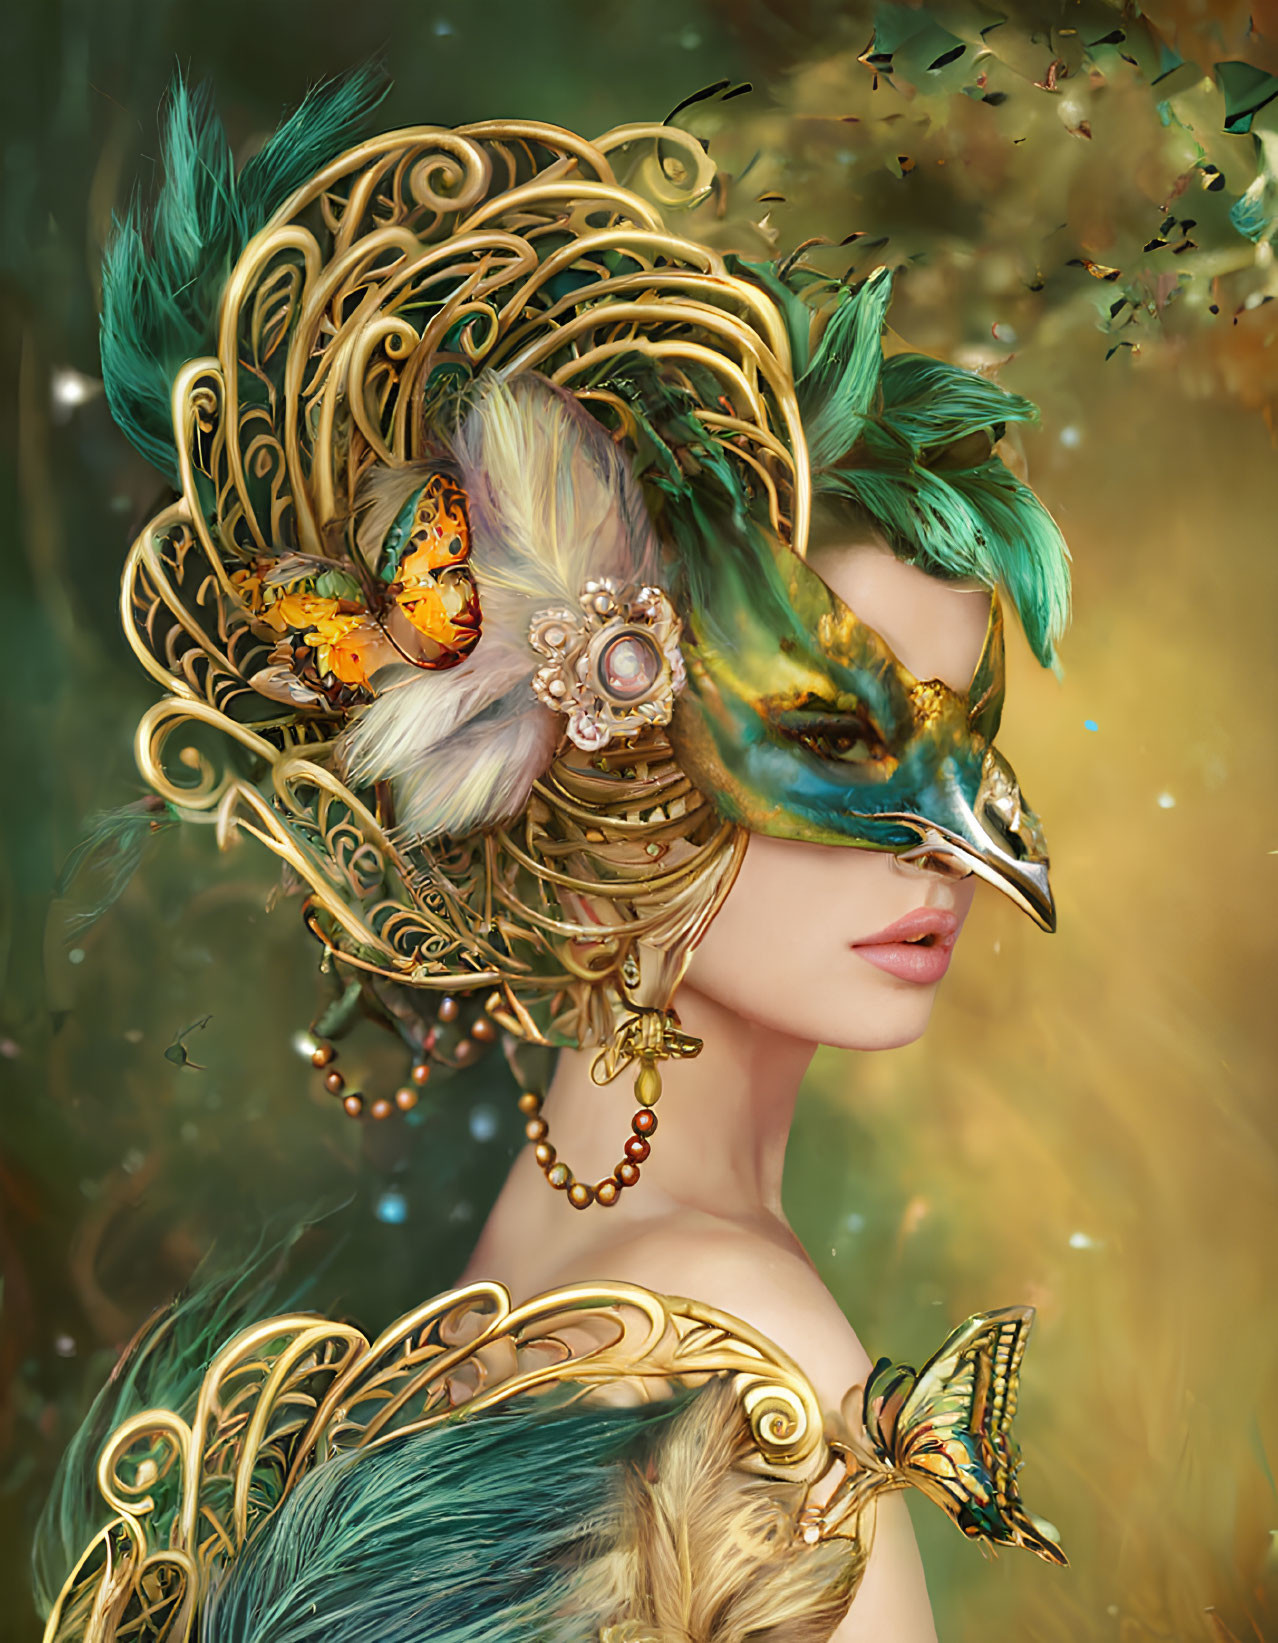 Elaborate Bird-Themed Mask and Headpiece with Feathers and Pearls